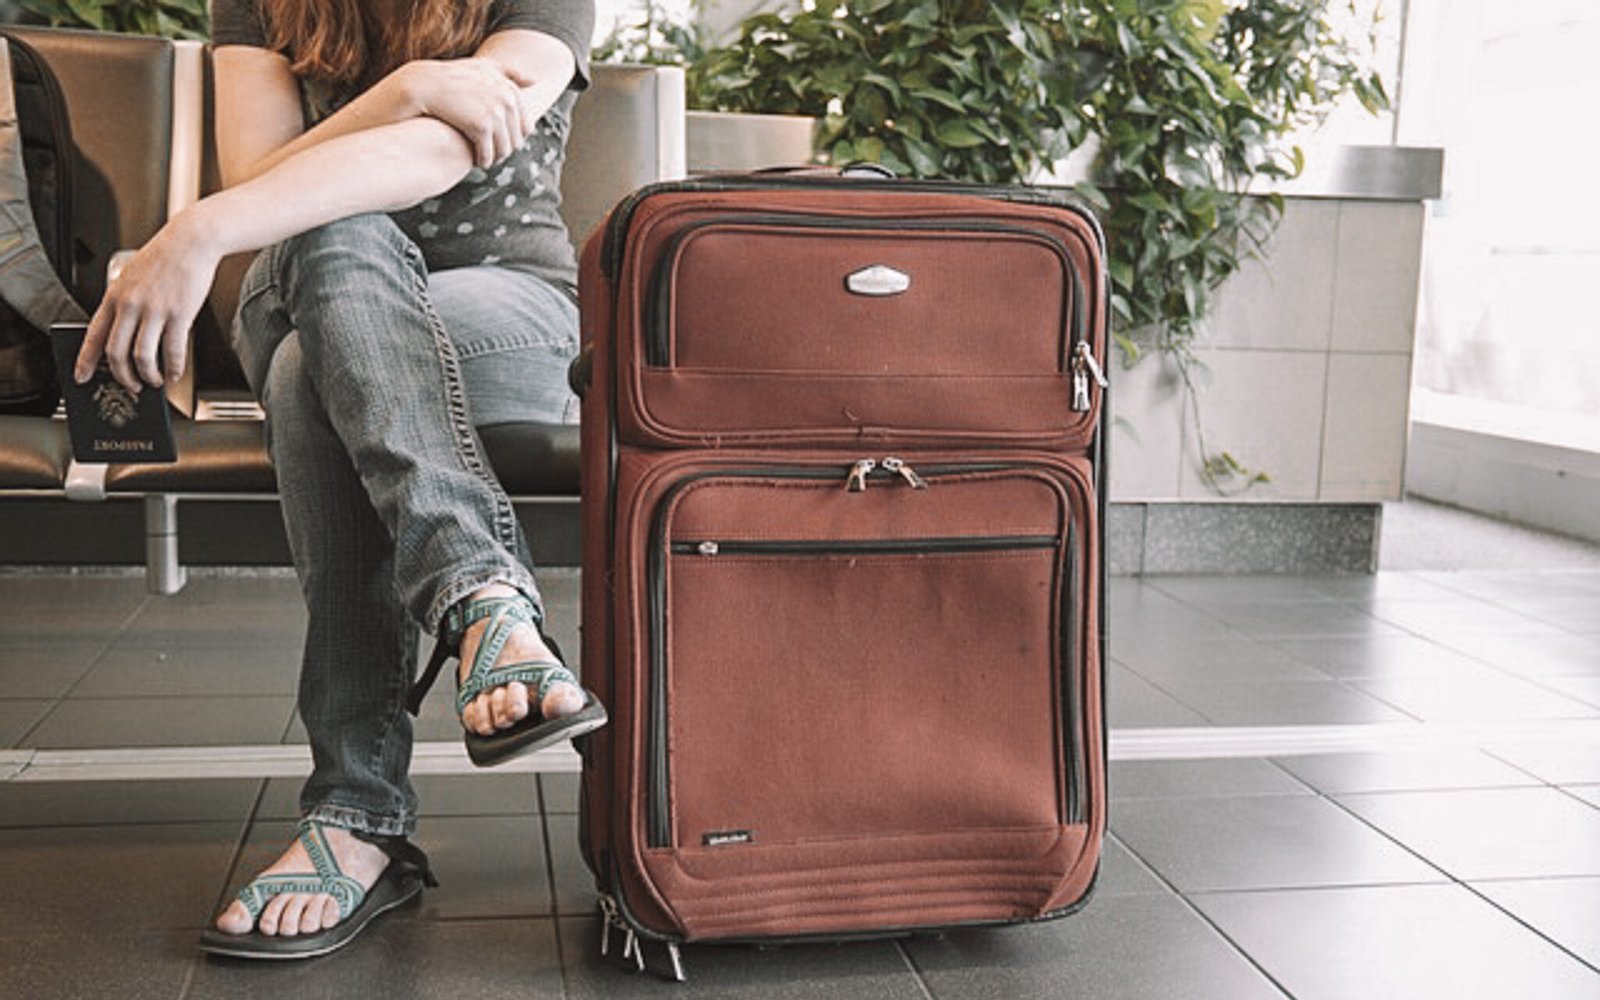 blog post about how to pack in a carry-on for a week